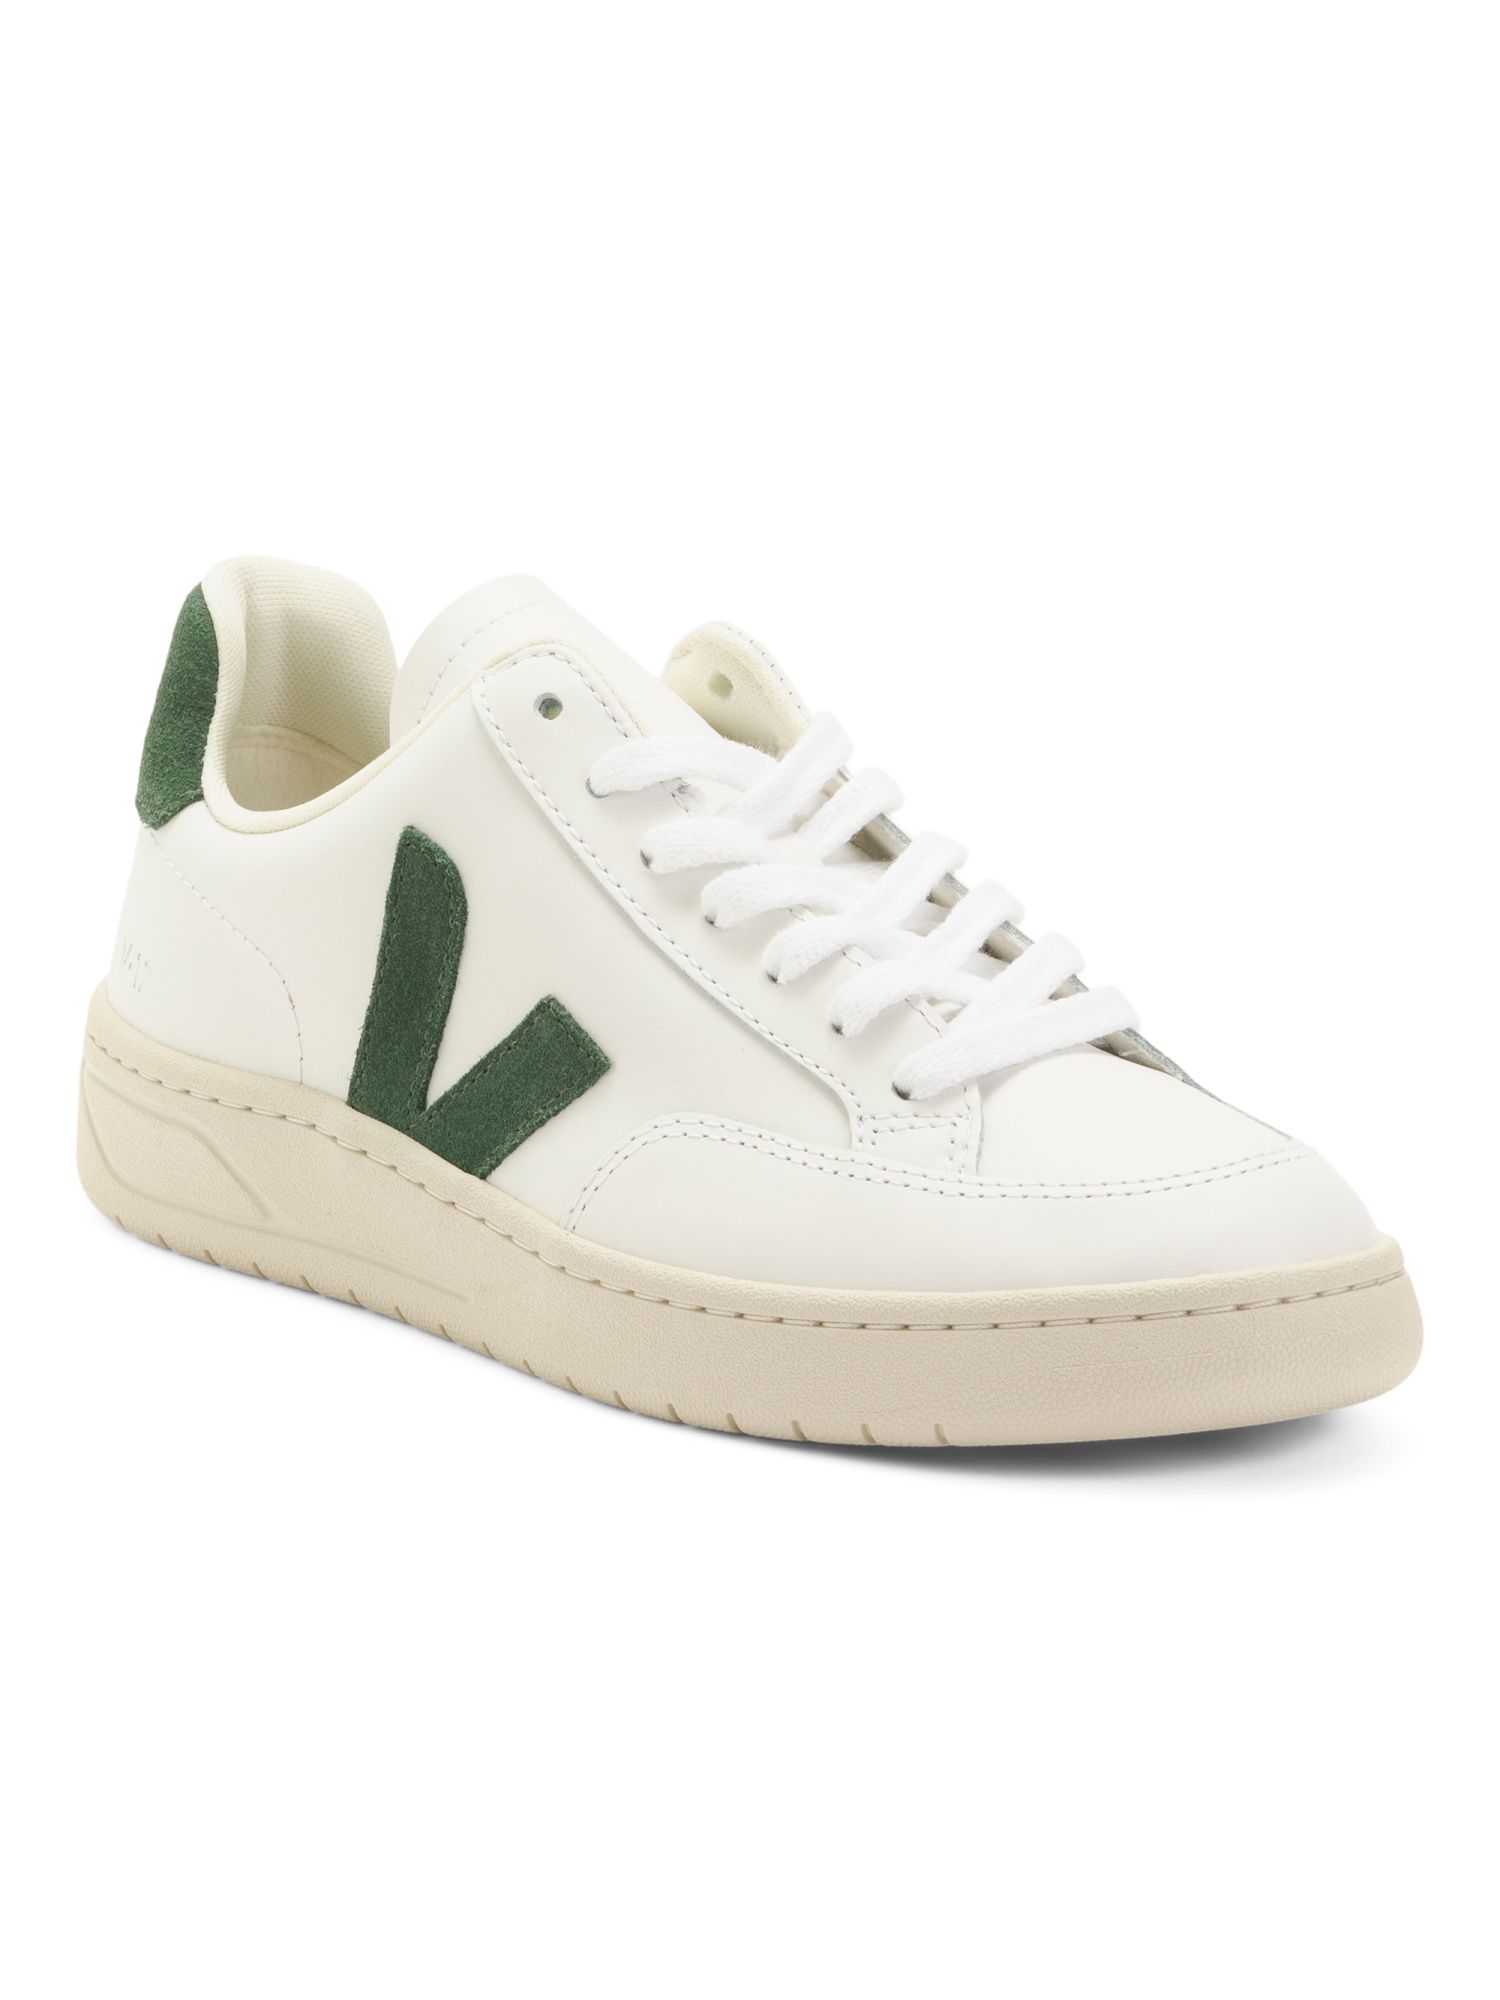 Made In Brazil Leather Sneakers | Marshalls